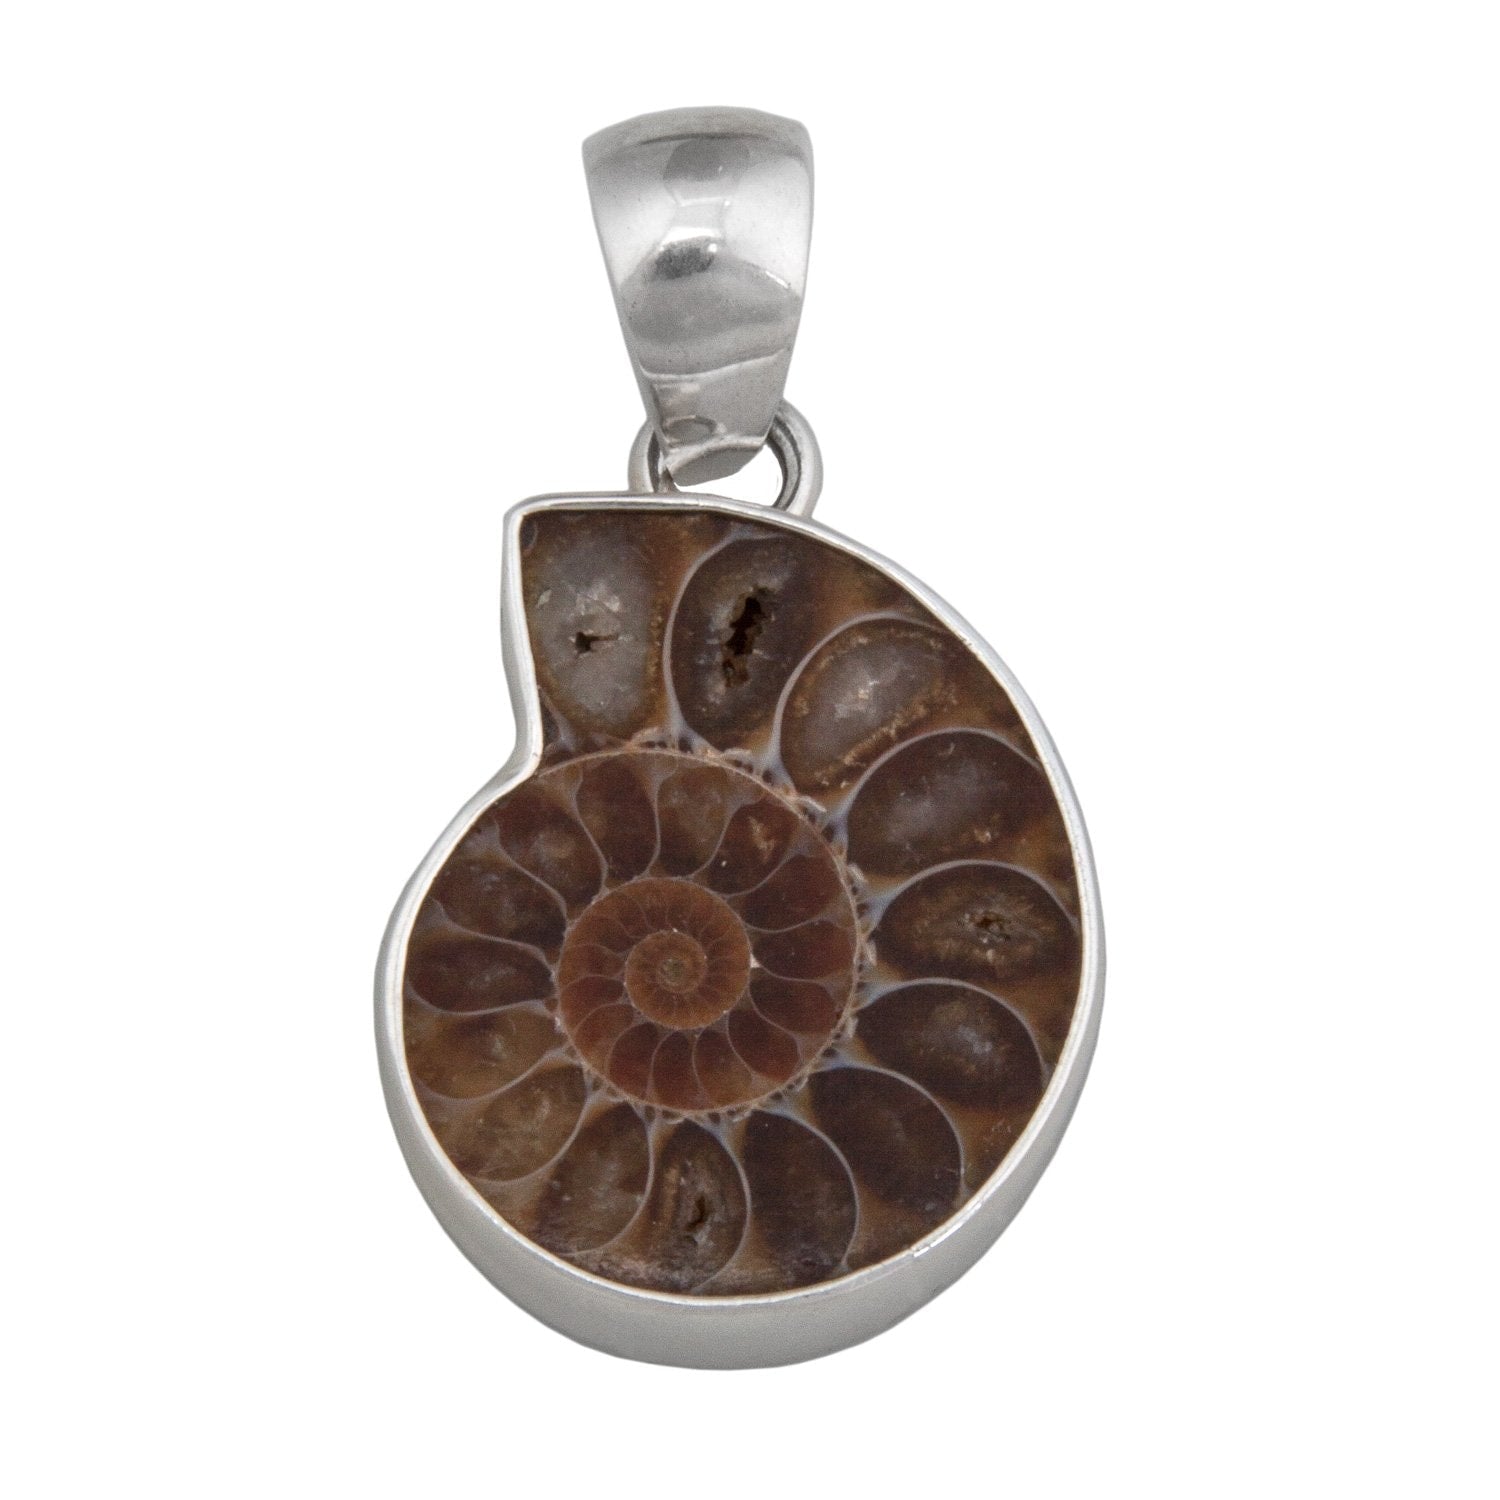 Charles Albert Jewelry - Sterling Silver Ammonite Pendant - Front View